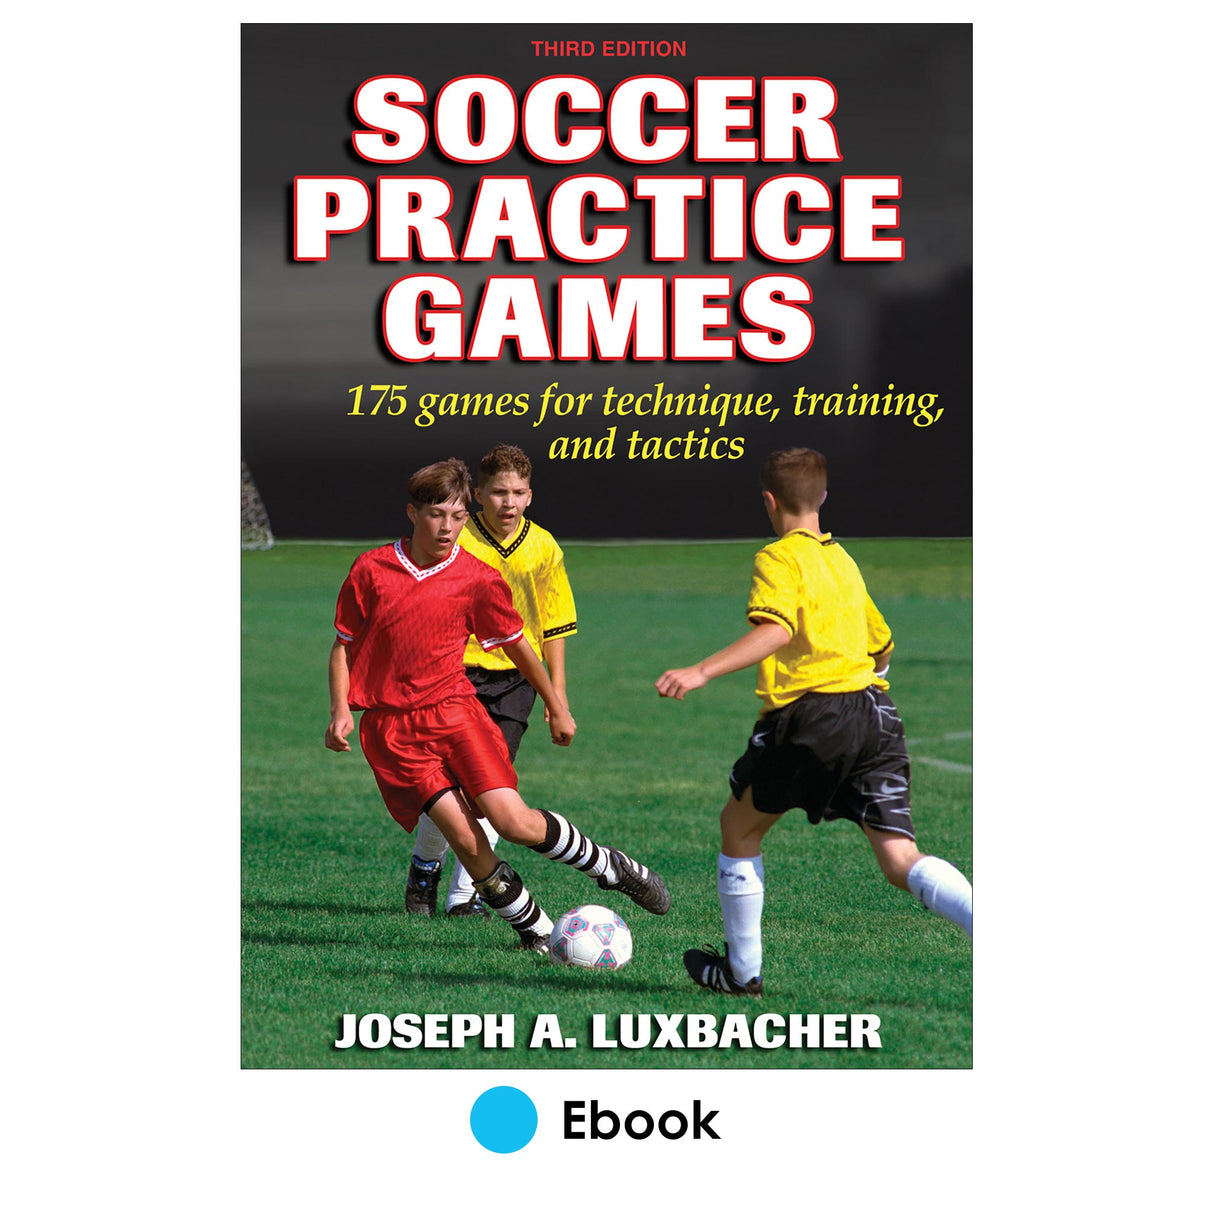 Soccer Practice Games 3rd Edition PDF